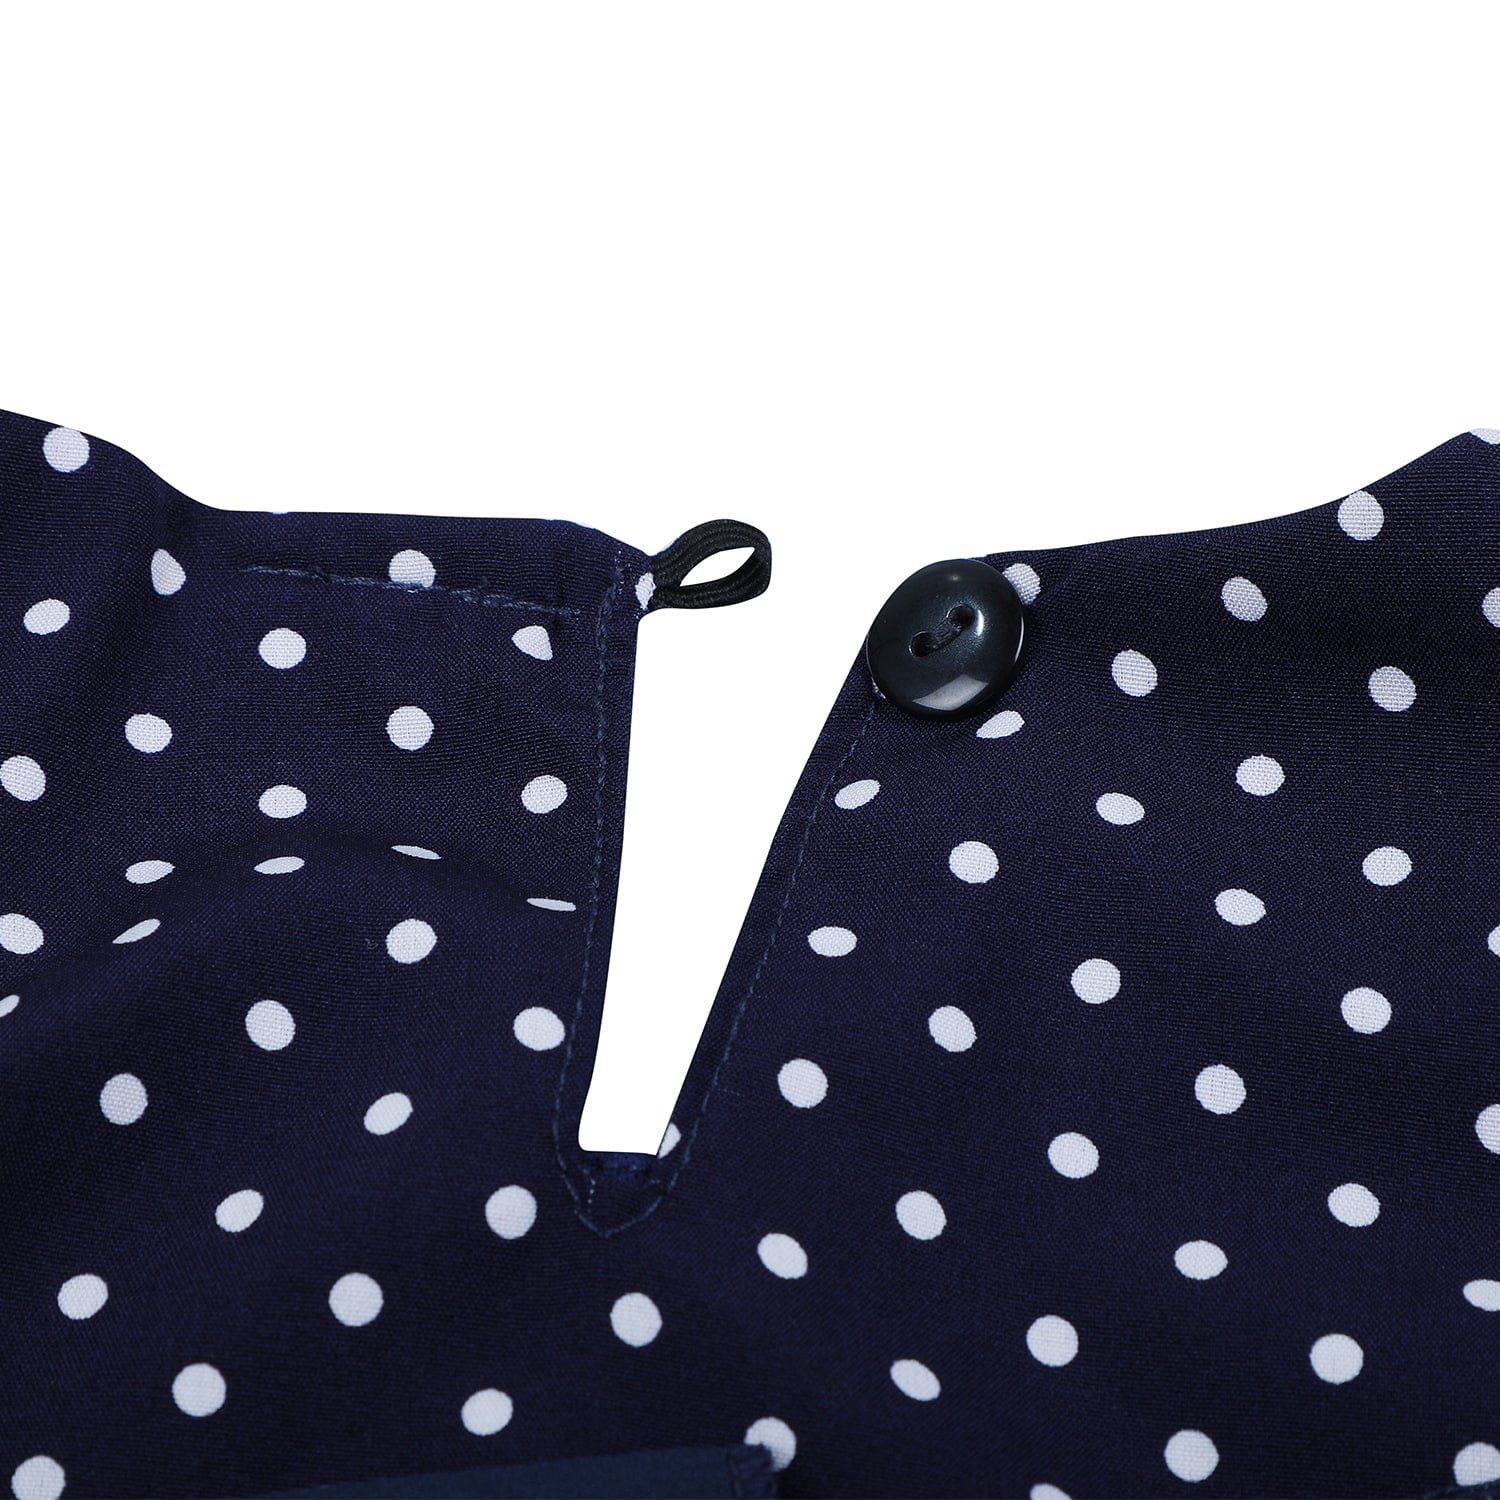 Baby Moo Polka Dot With Pearl And Bow Detail Frilly Layered Party Dress - Black - Baby Moo